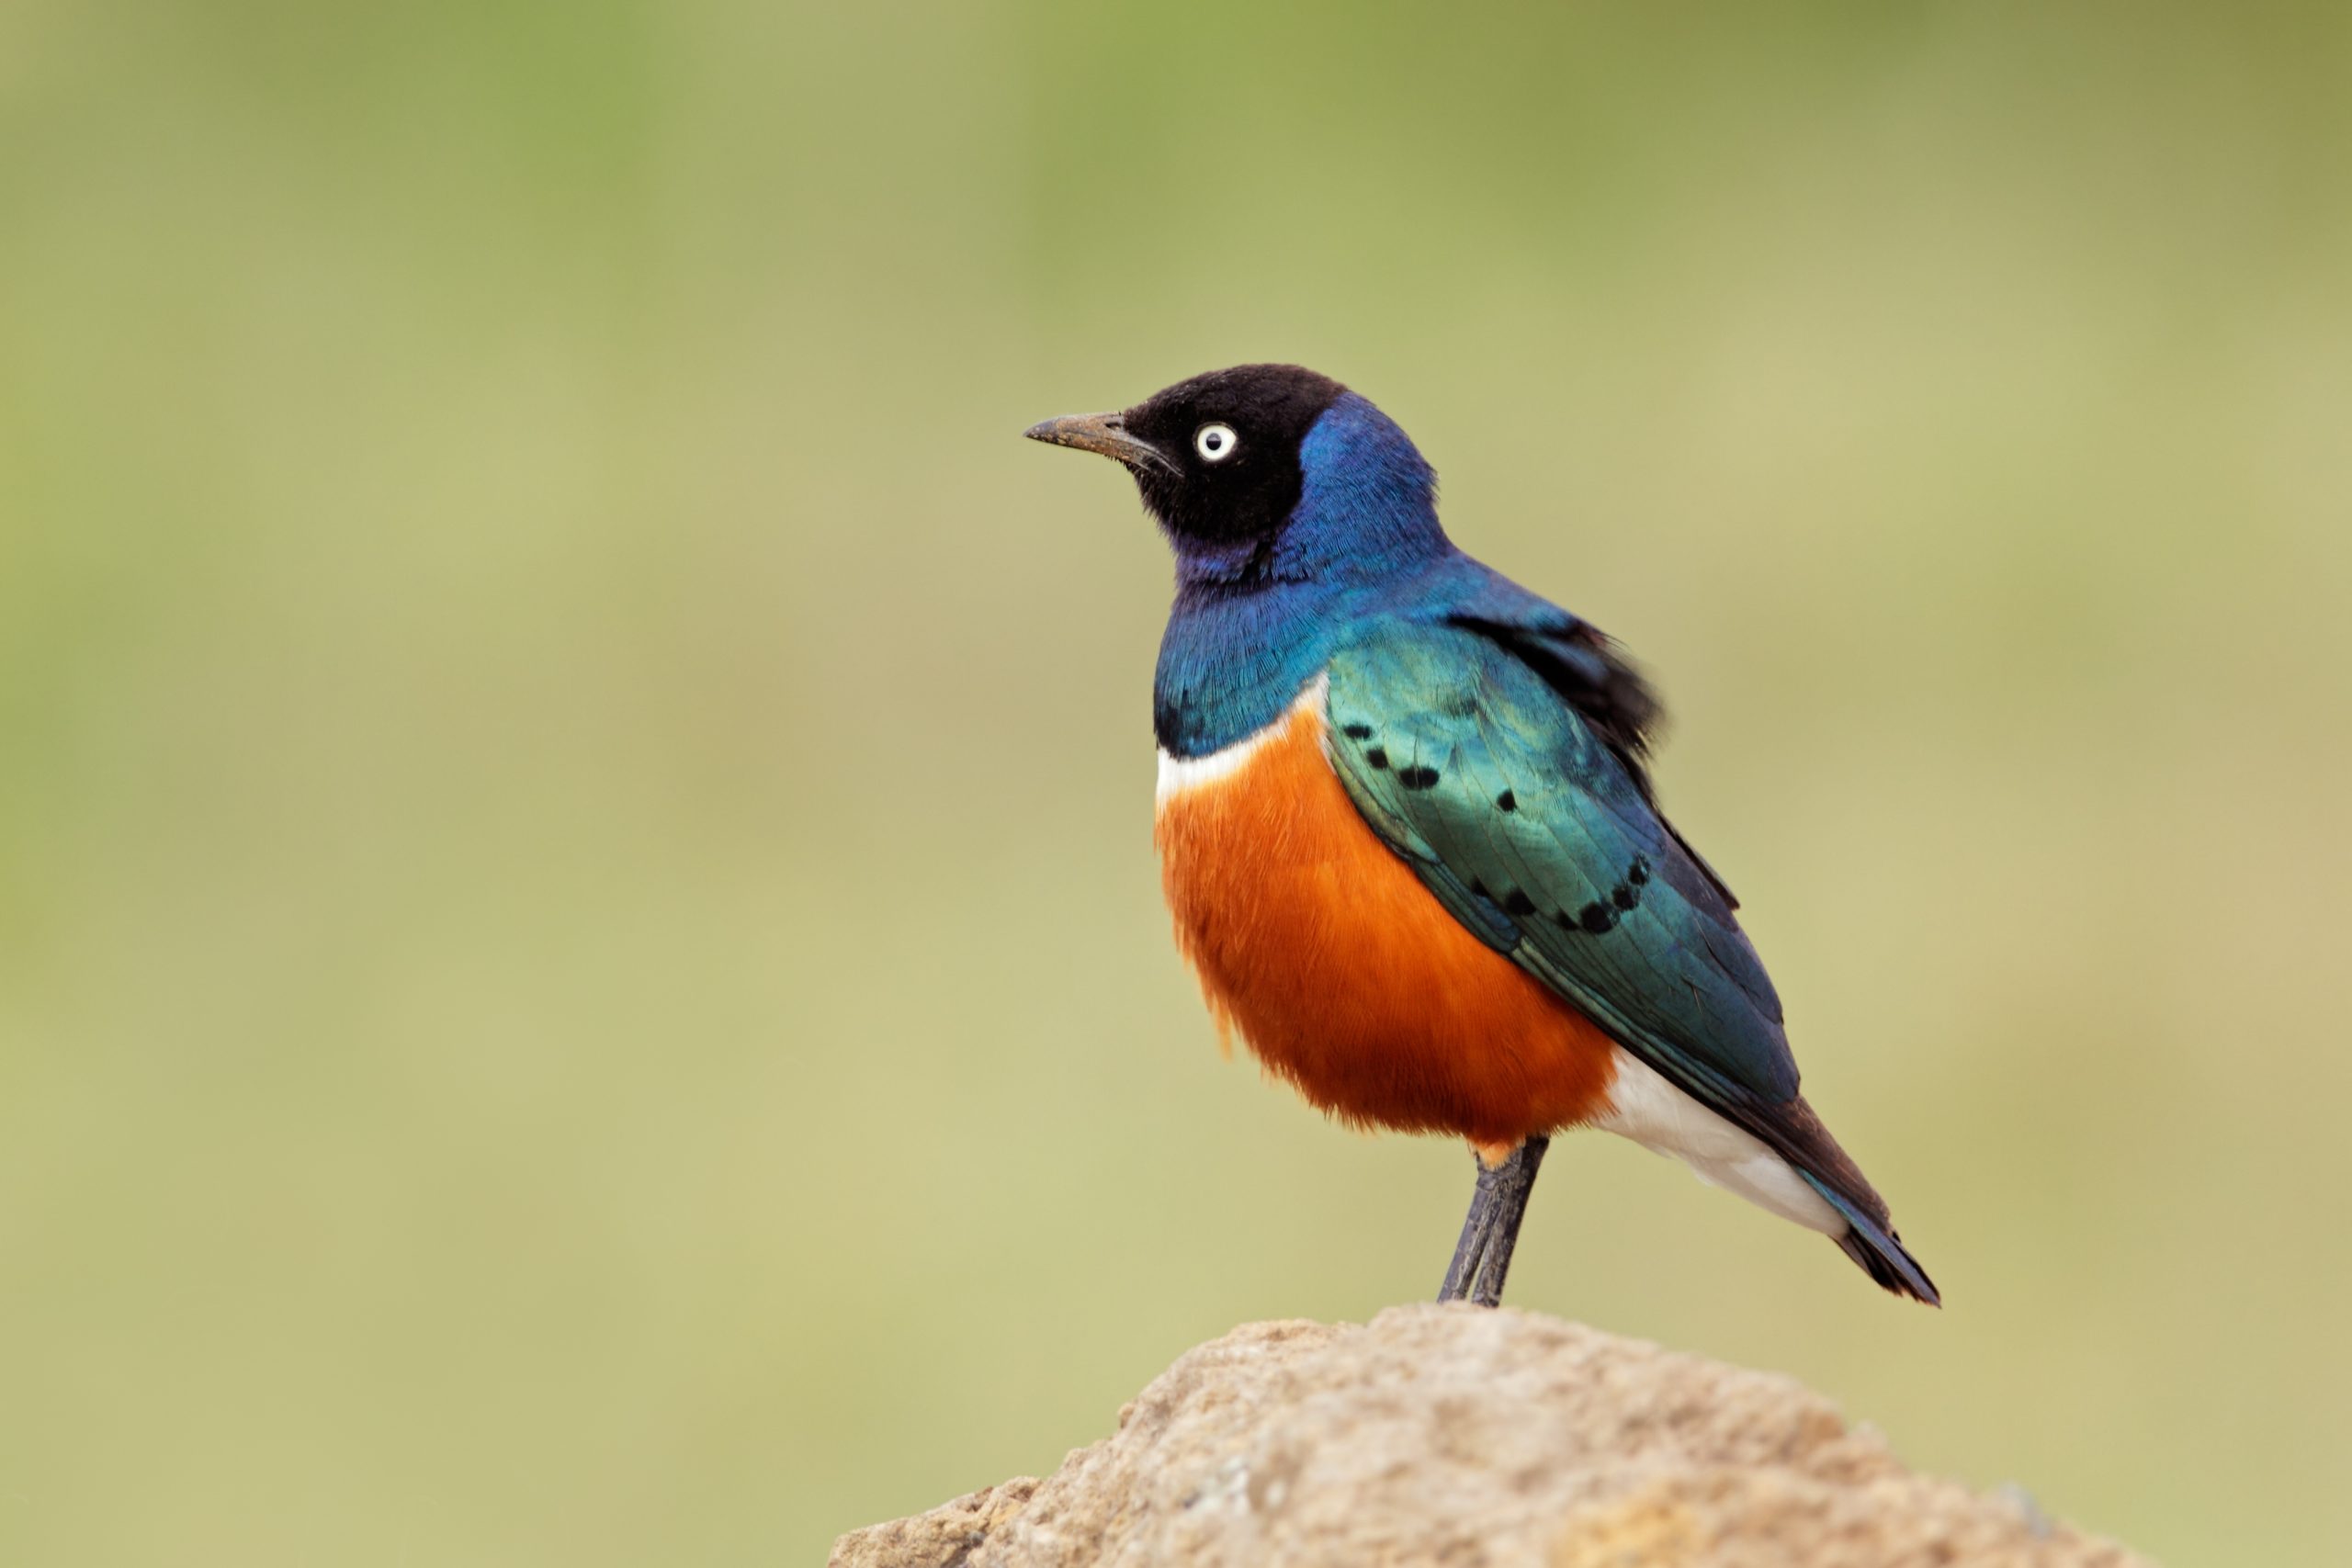 Superb Starling standing on a rock